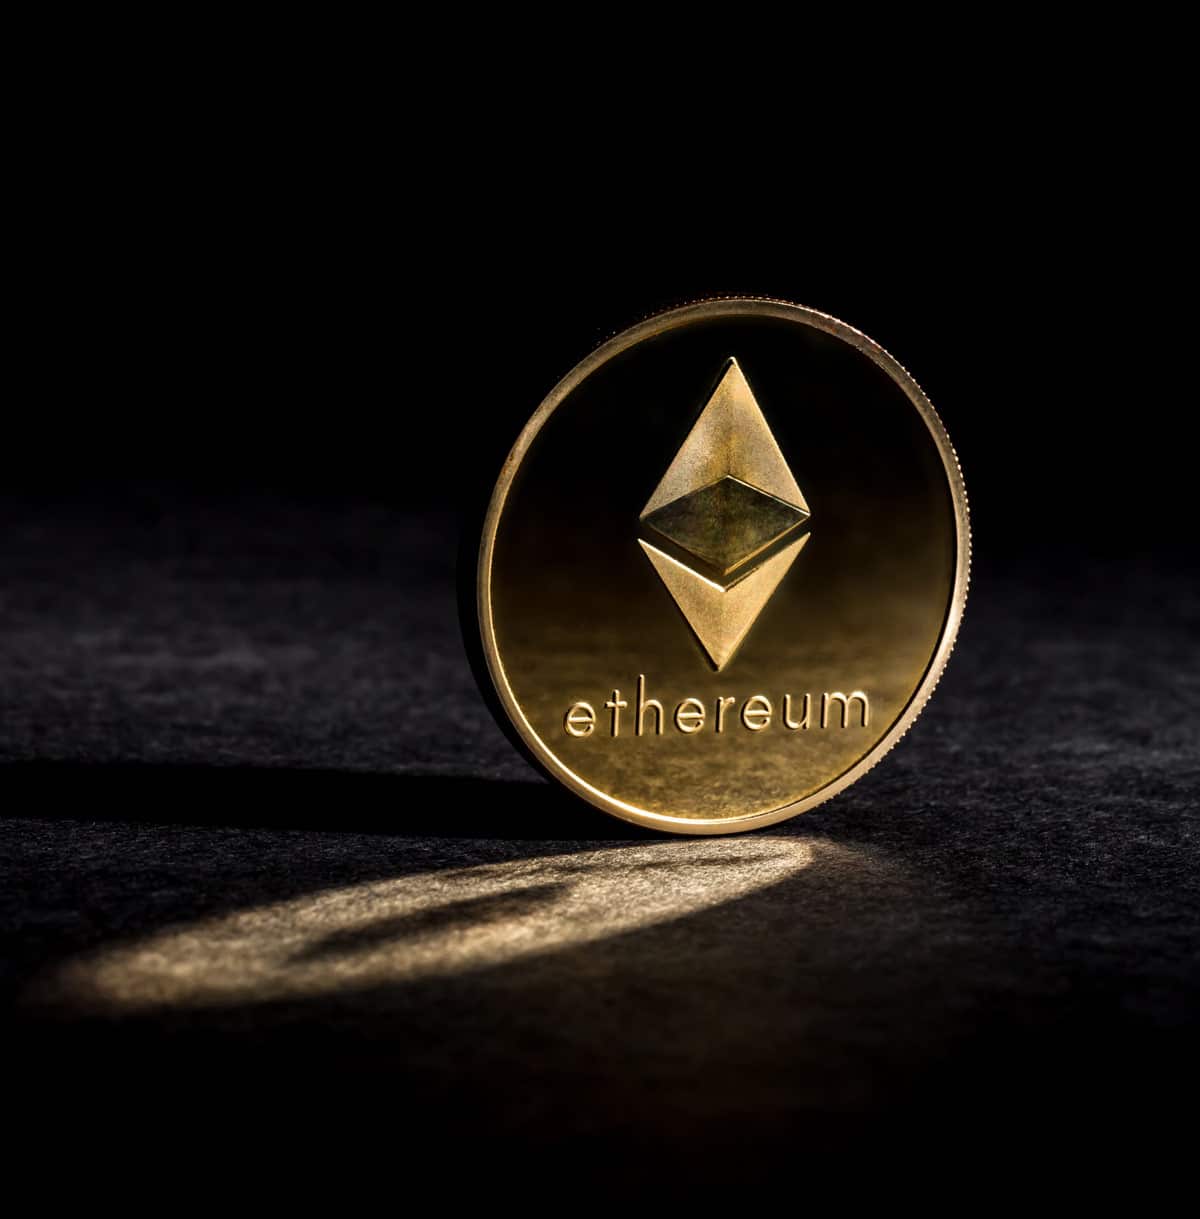 Ethereum coin. Buy, sell, and, trade Ethereum with Vancouver Bitcoin.